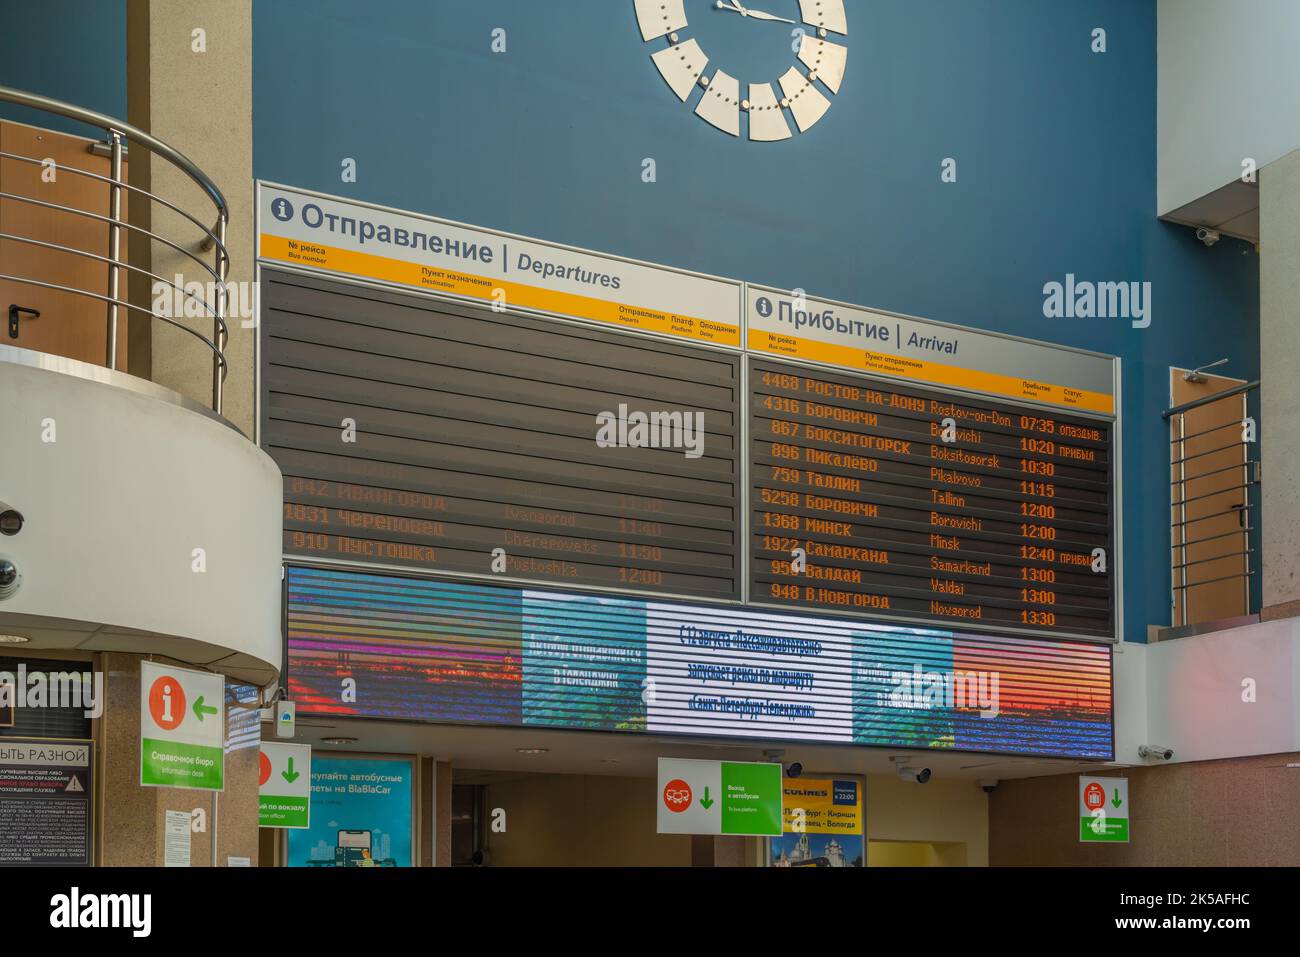 SANKT PETERSBURG , RUSSIA - AUGUST 27.2022: Busstation scoreboard of St. Petersburg with sign from busses to Helsinki, Tallin und Russian towns Stock Photo